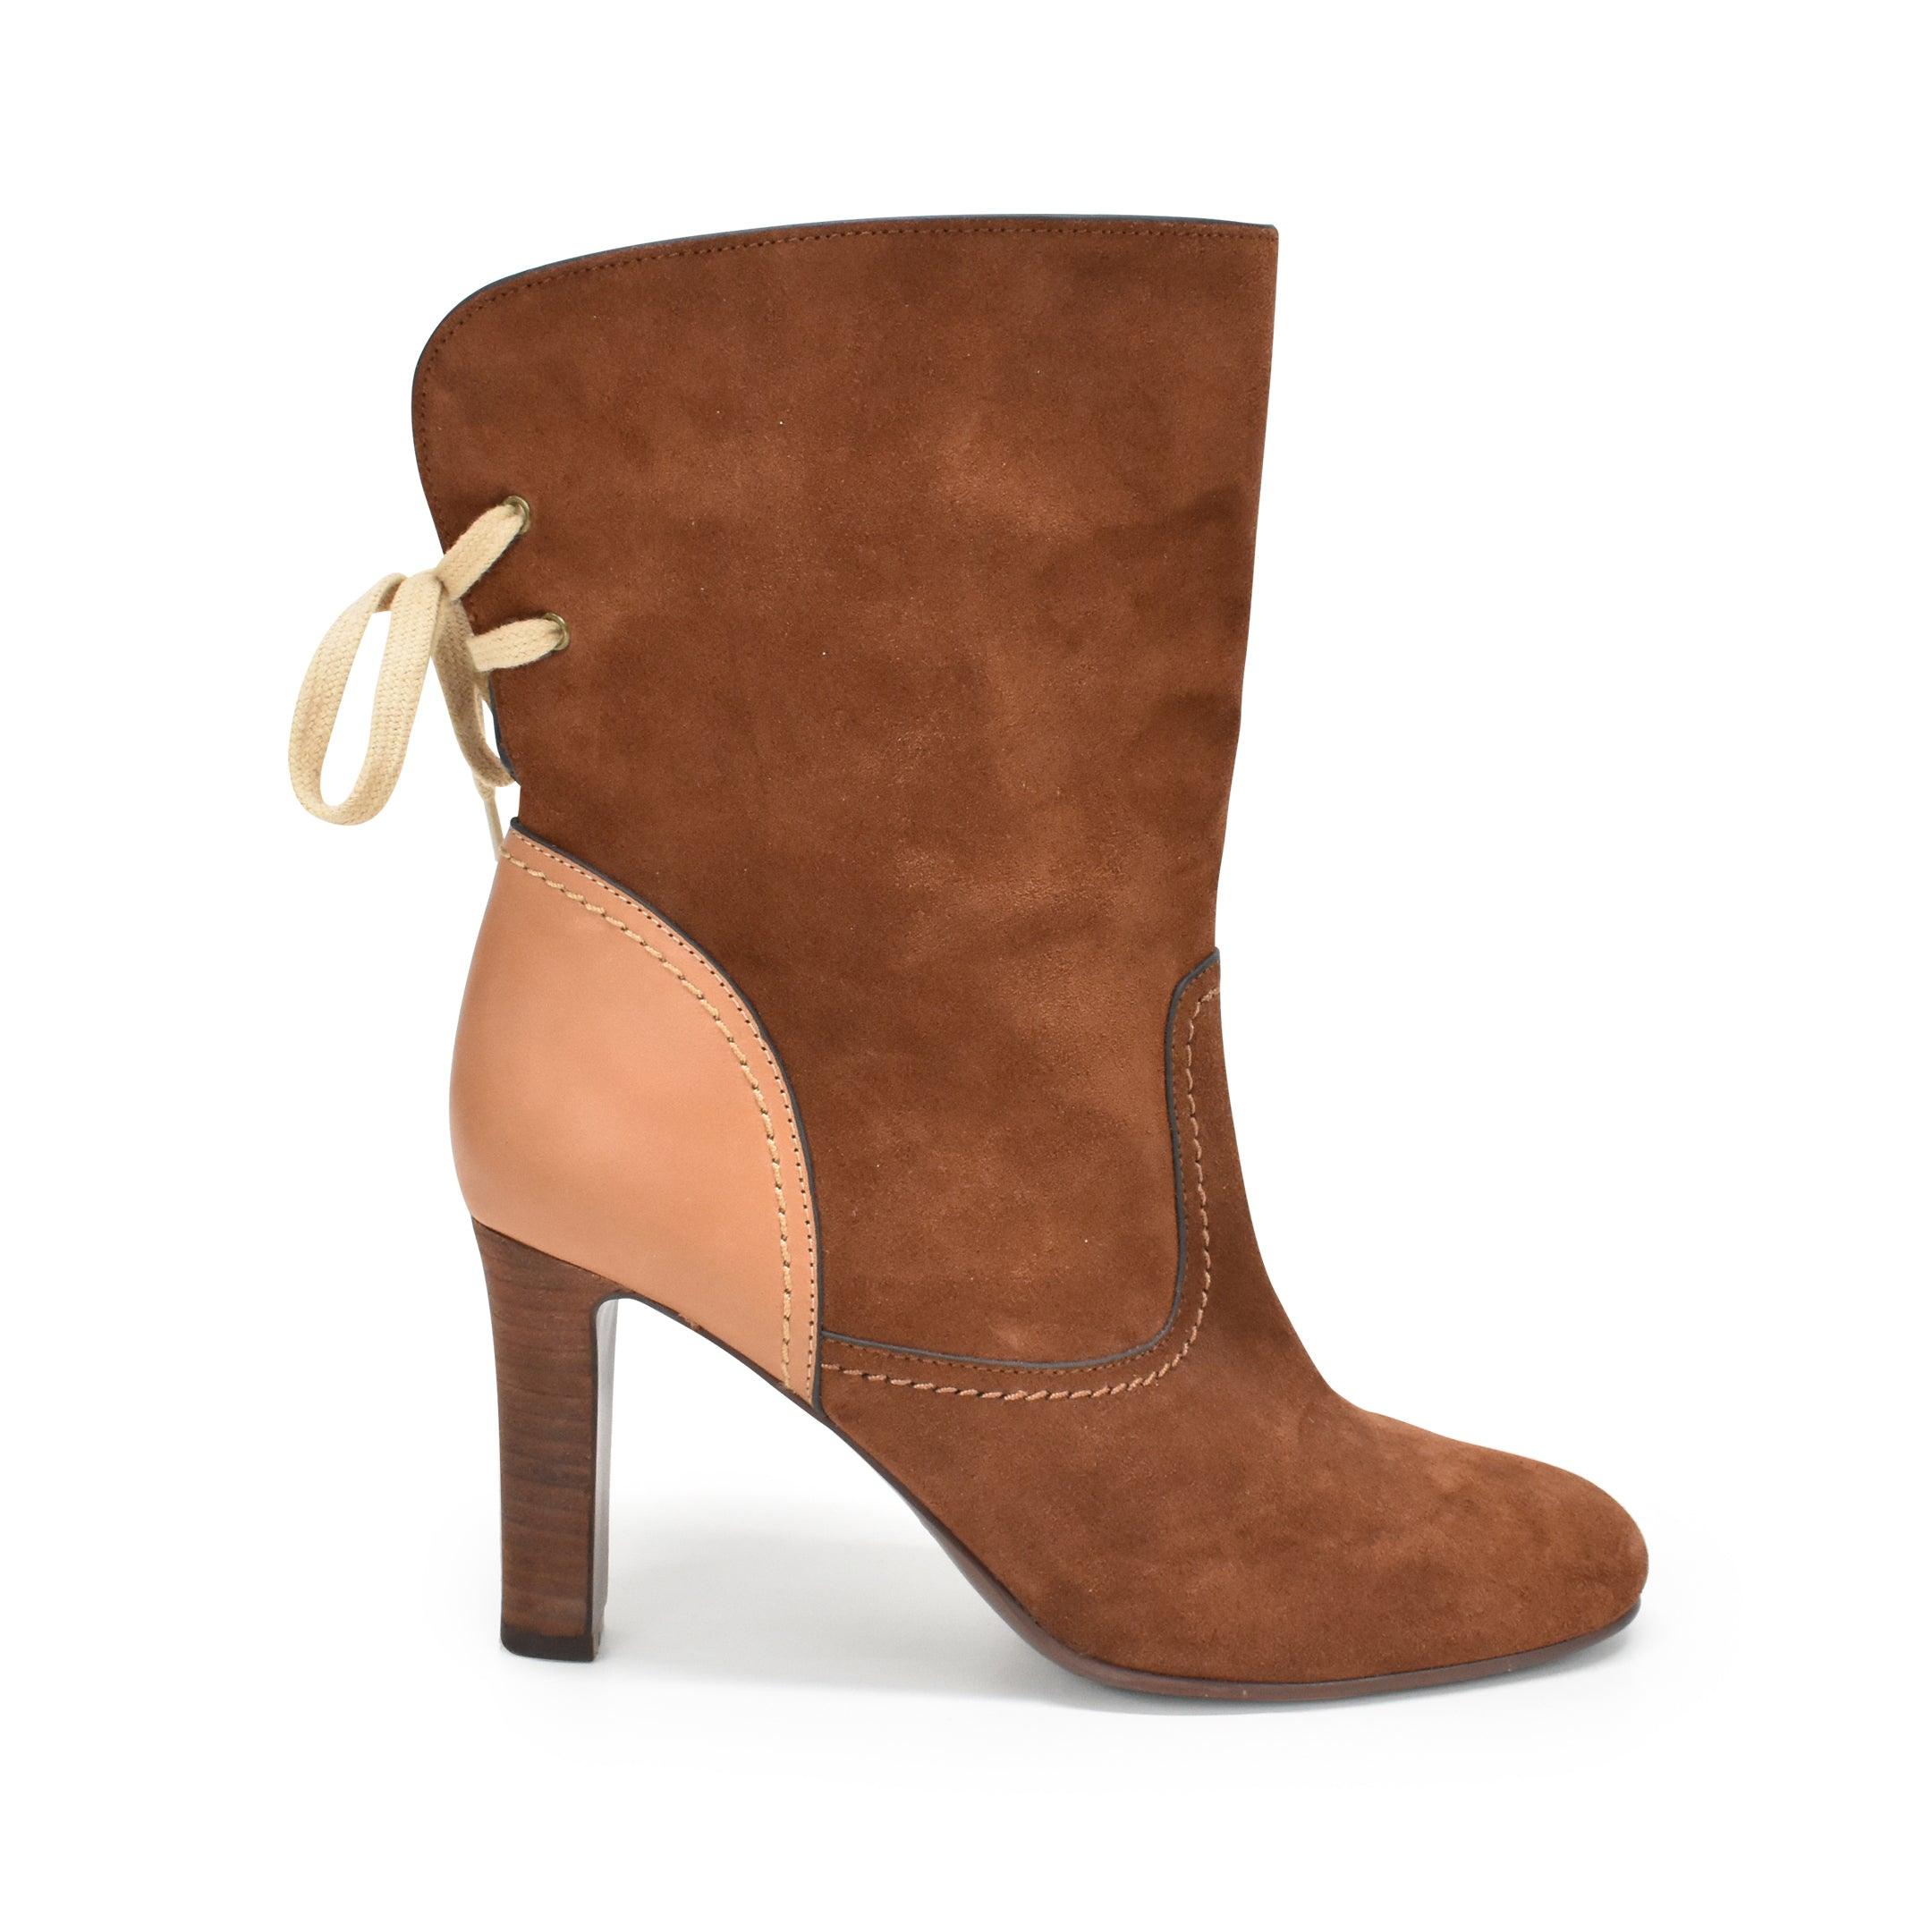 See by Chloe Ankle Boots - Women's 40 - Fashionably Yours